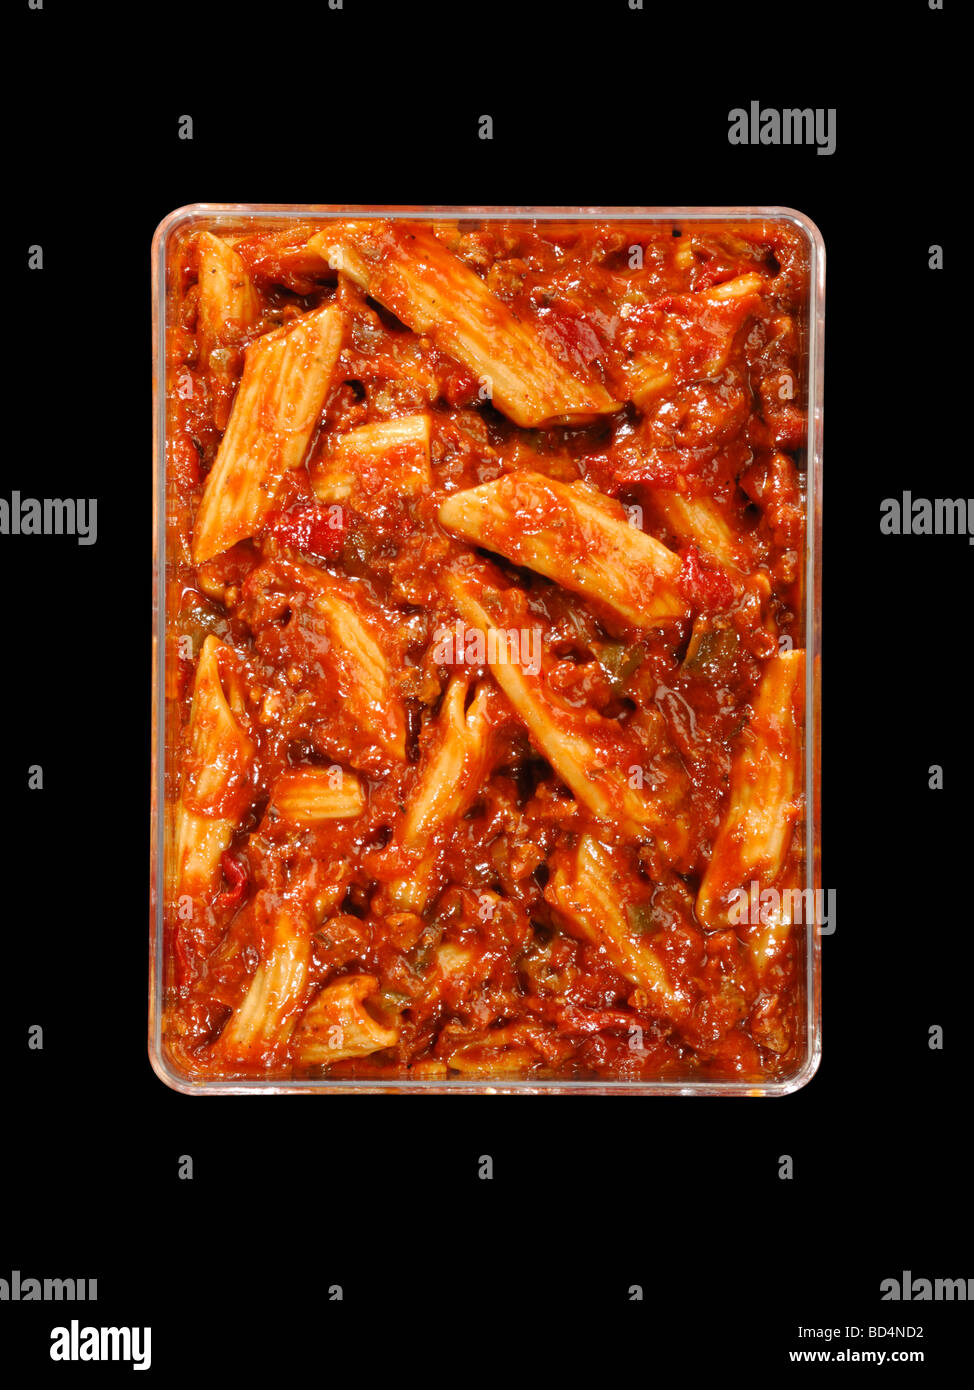 A plastic container with military food rations, pasta with meat sauce Stock Photo